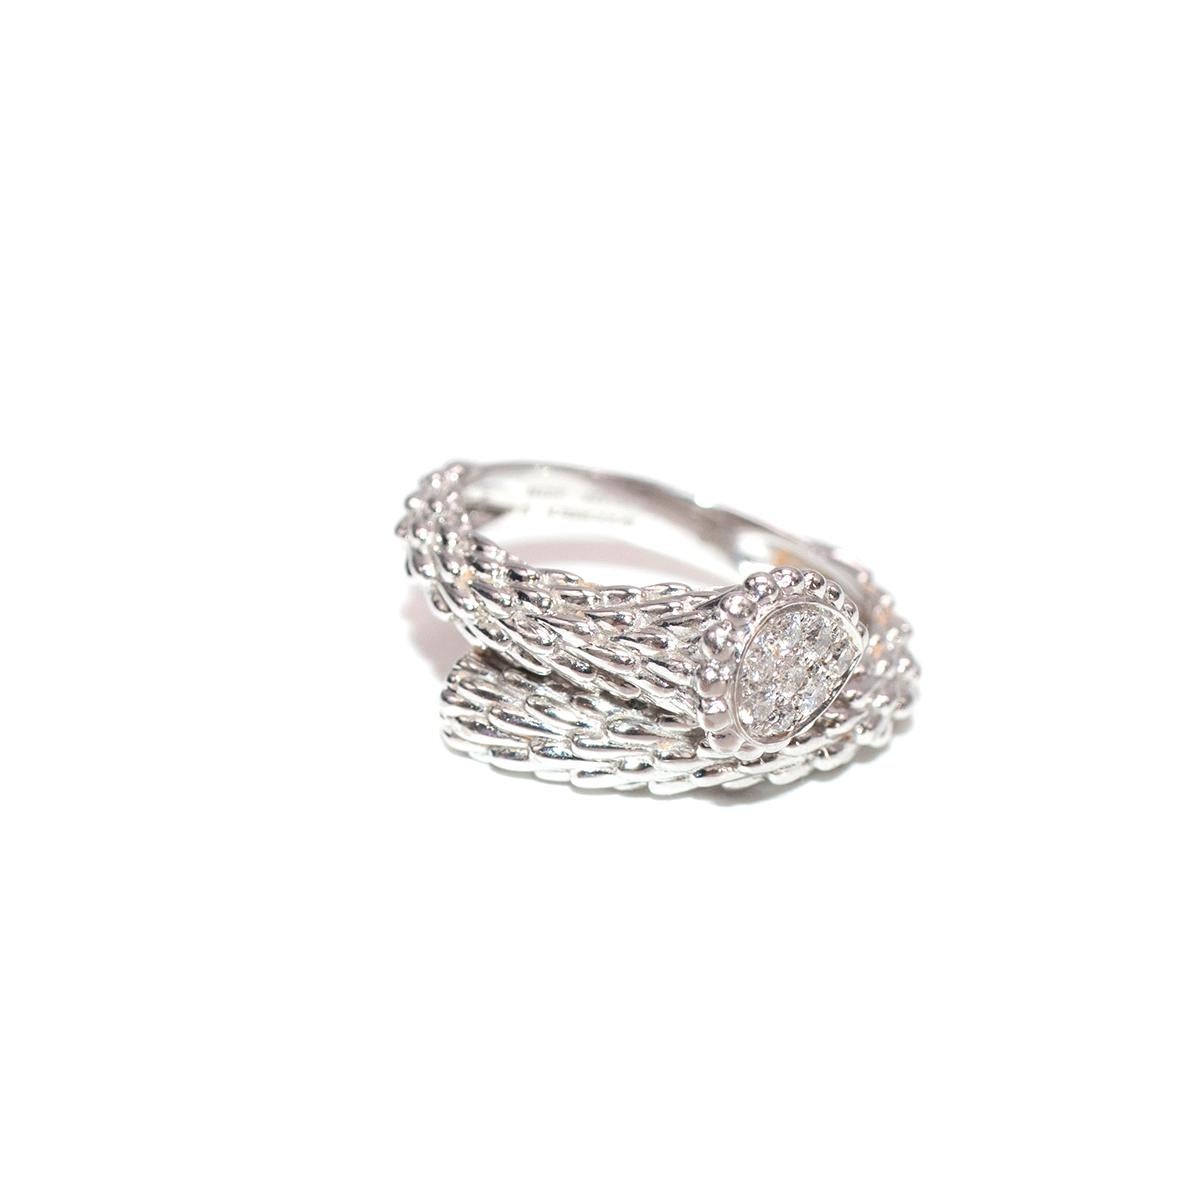 Boucheron 18kt White Gold Serpent Bohème Ring S Motif 

Boucheron Serpent Boheme ring, sophisticated and glamours meets minimal and elegant with this white gold coil design with additional 8 diamonds in the crown.

8 round diamonds, 0.33 carats
18K